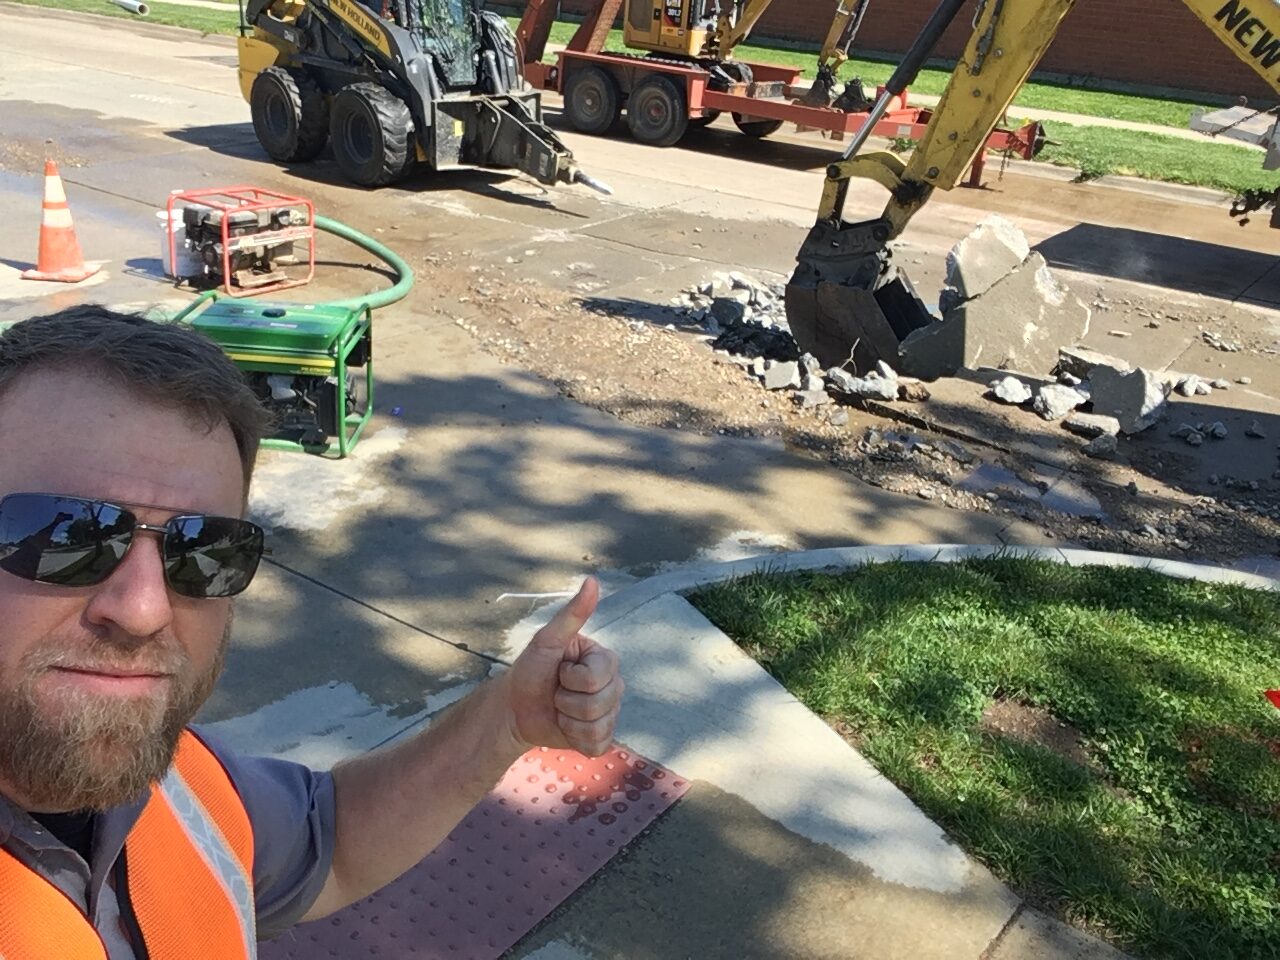 Eagle Scout wastewater professional serves his community by keeping the water clean